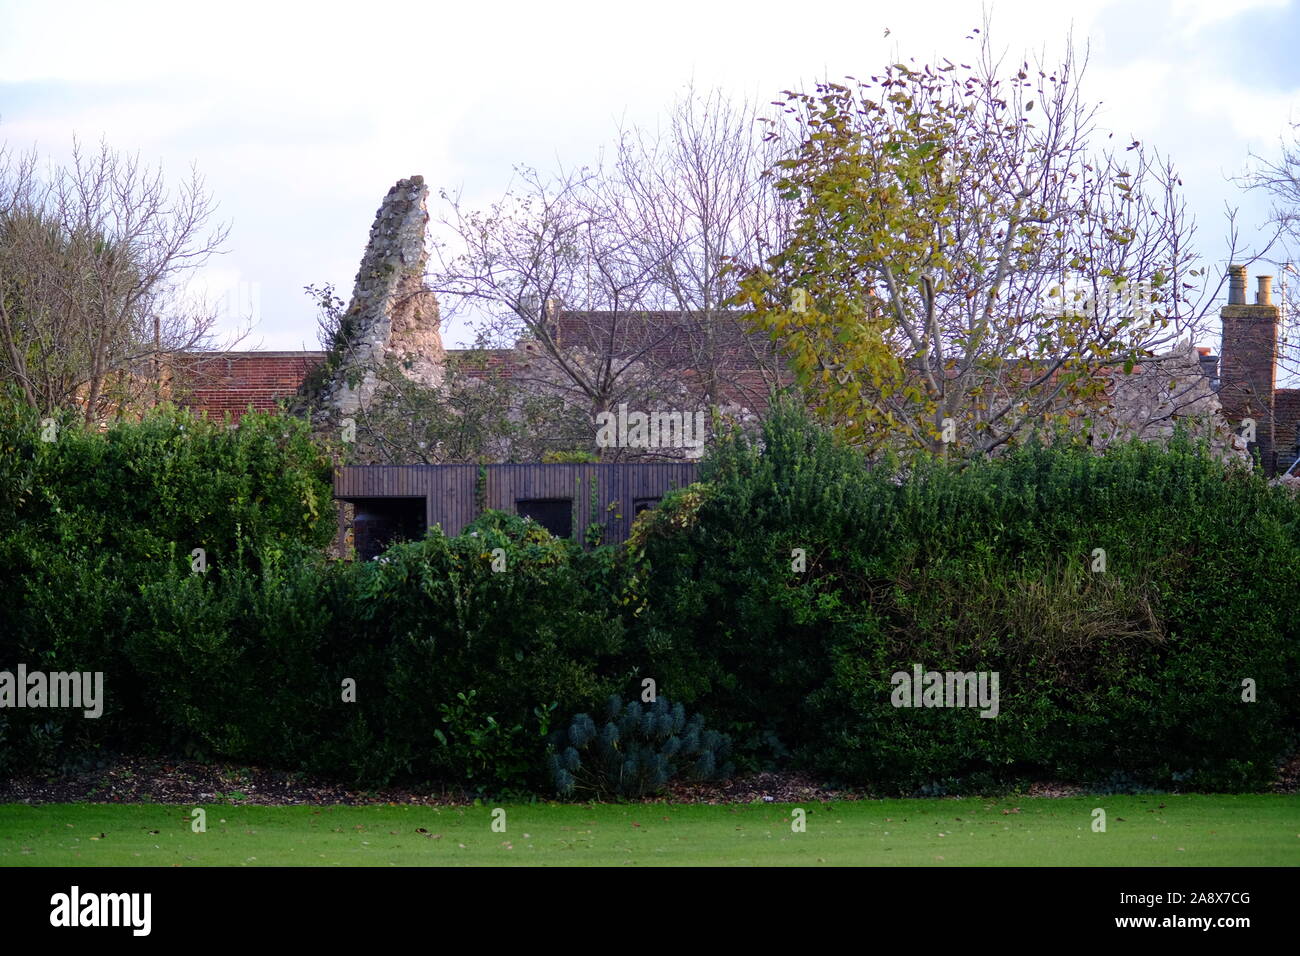 Lewes, East Sussex, UK. 11th Nov 2019.  600 tonne part of Lewes Castle boundary wall collapses onto properties in Castle Ditch Lane, Lewes. Photo shows the part of the collapse into a garden, but the majority of the rubble fell 10 meters into a property the other side. Credit: Peter Cripps/Alamy Live News Stock Photo